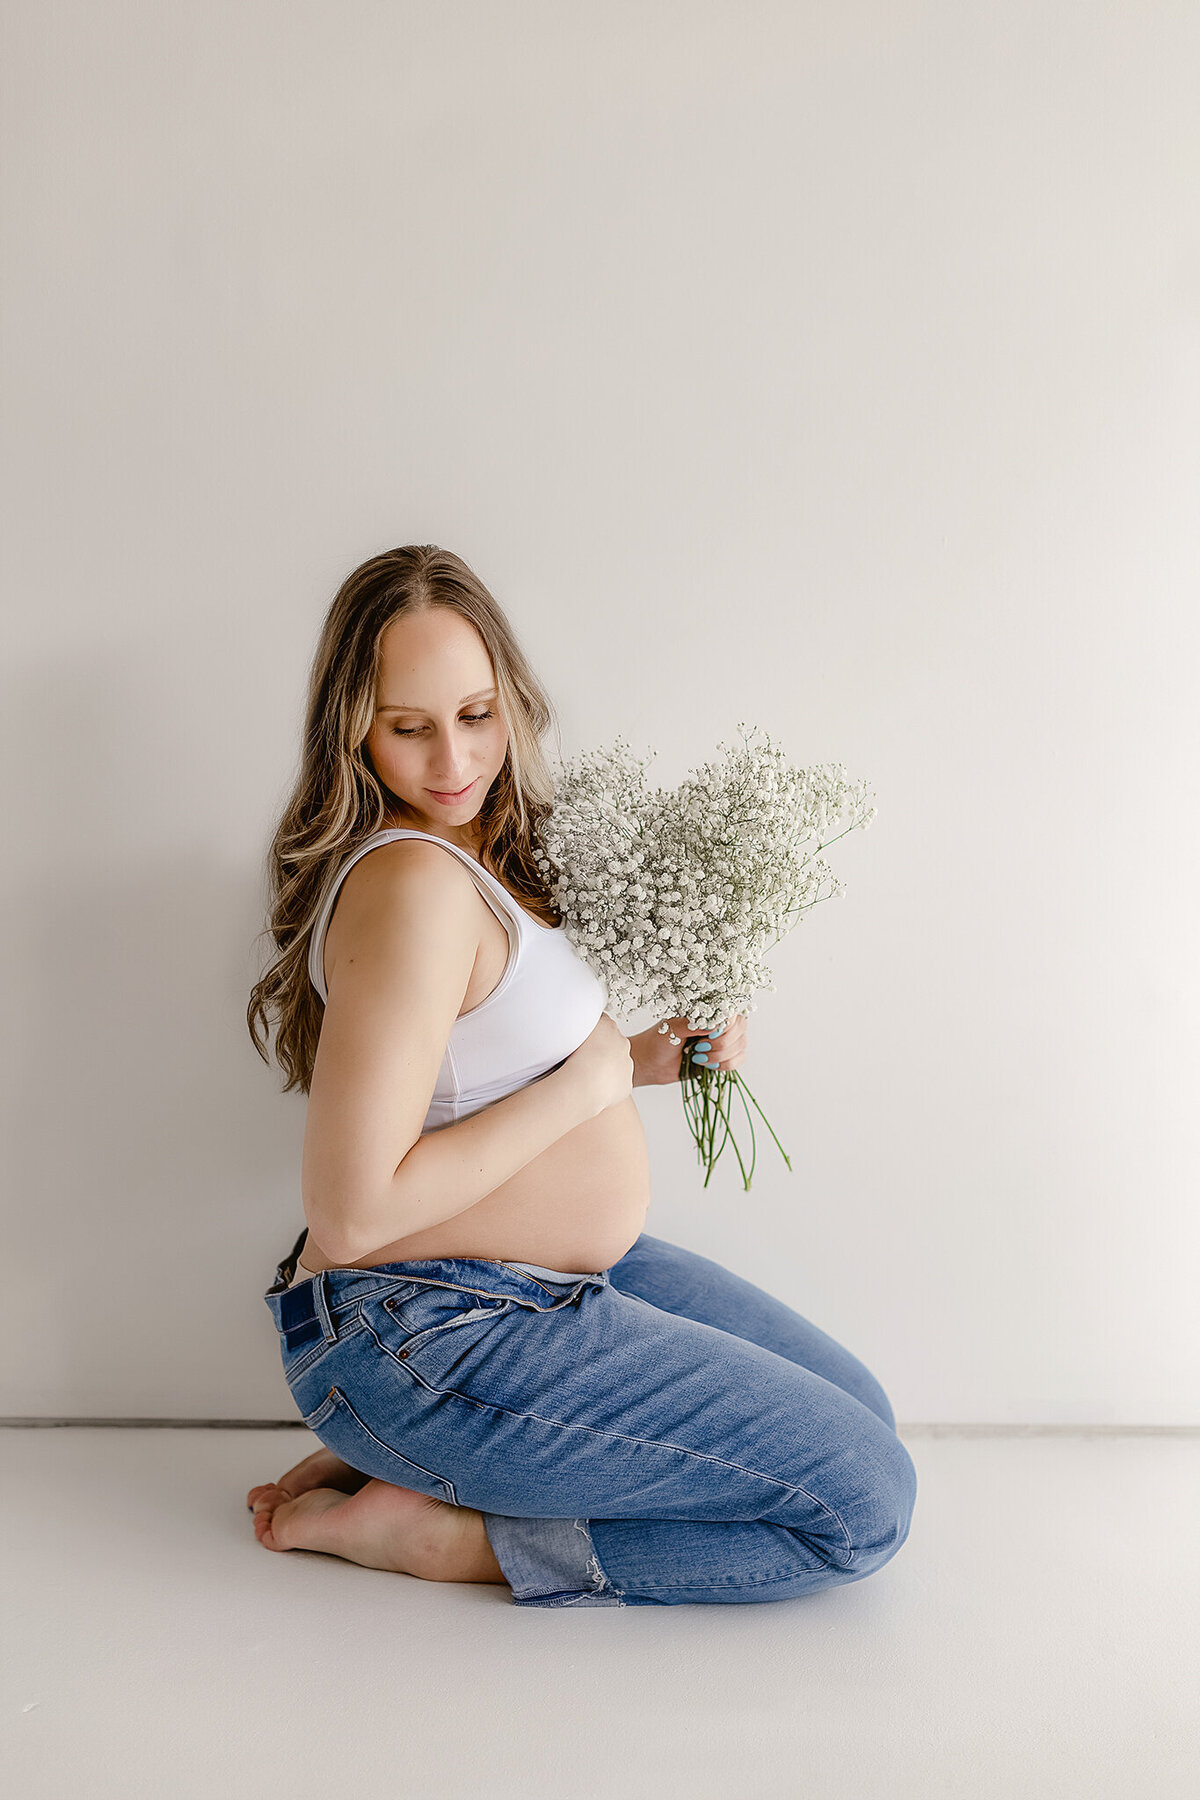 om holding a bouquet of flowers  for a fun studio maternity photography session in denver colorado